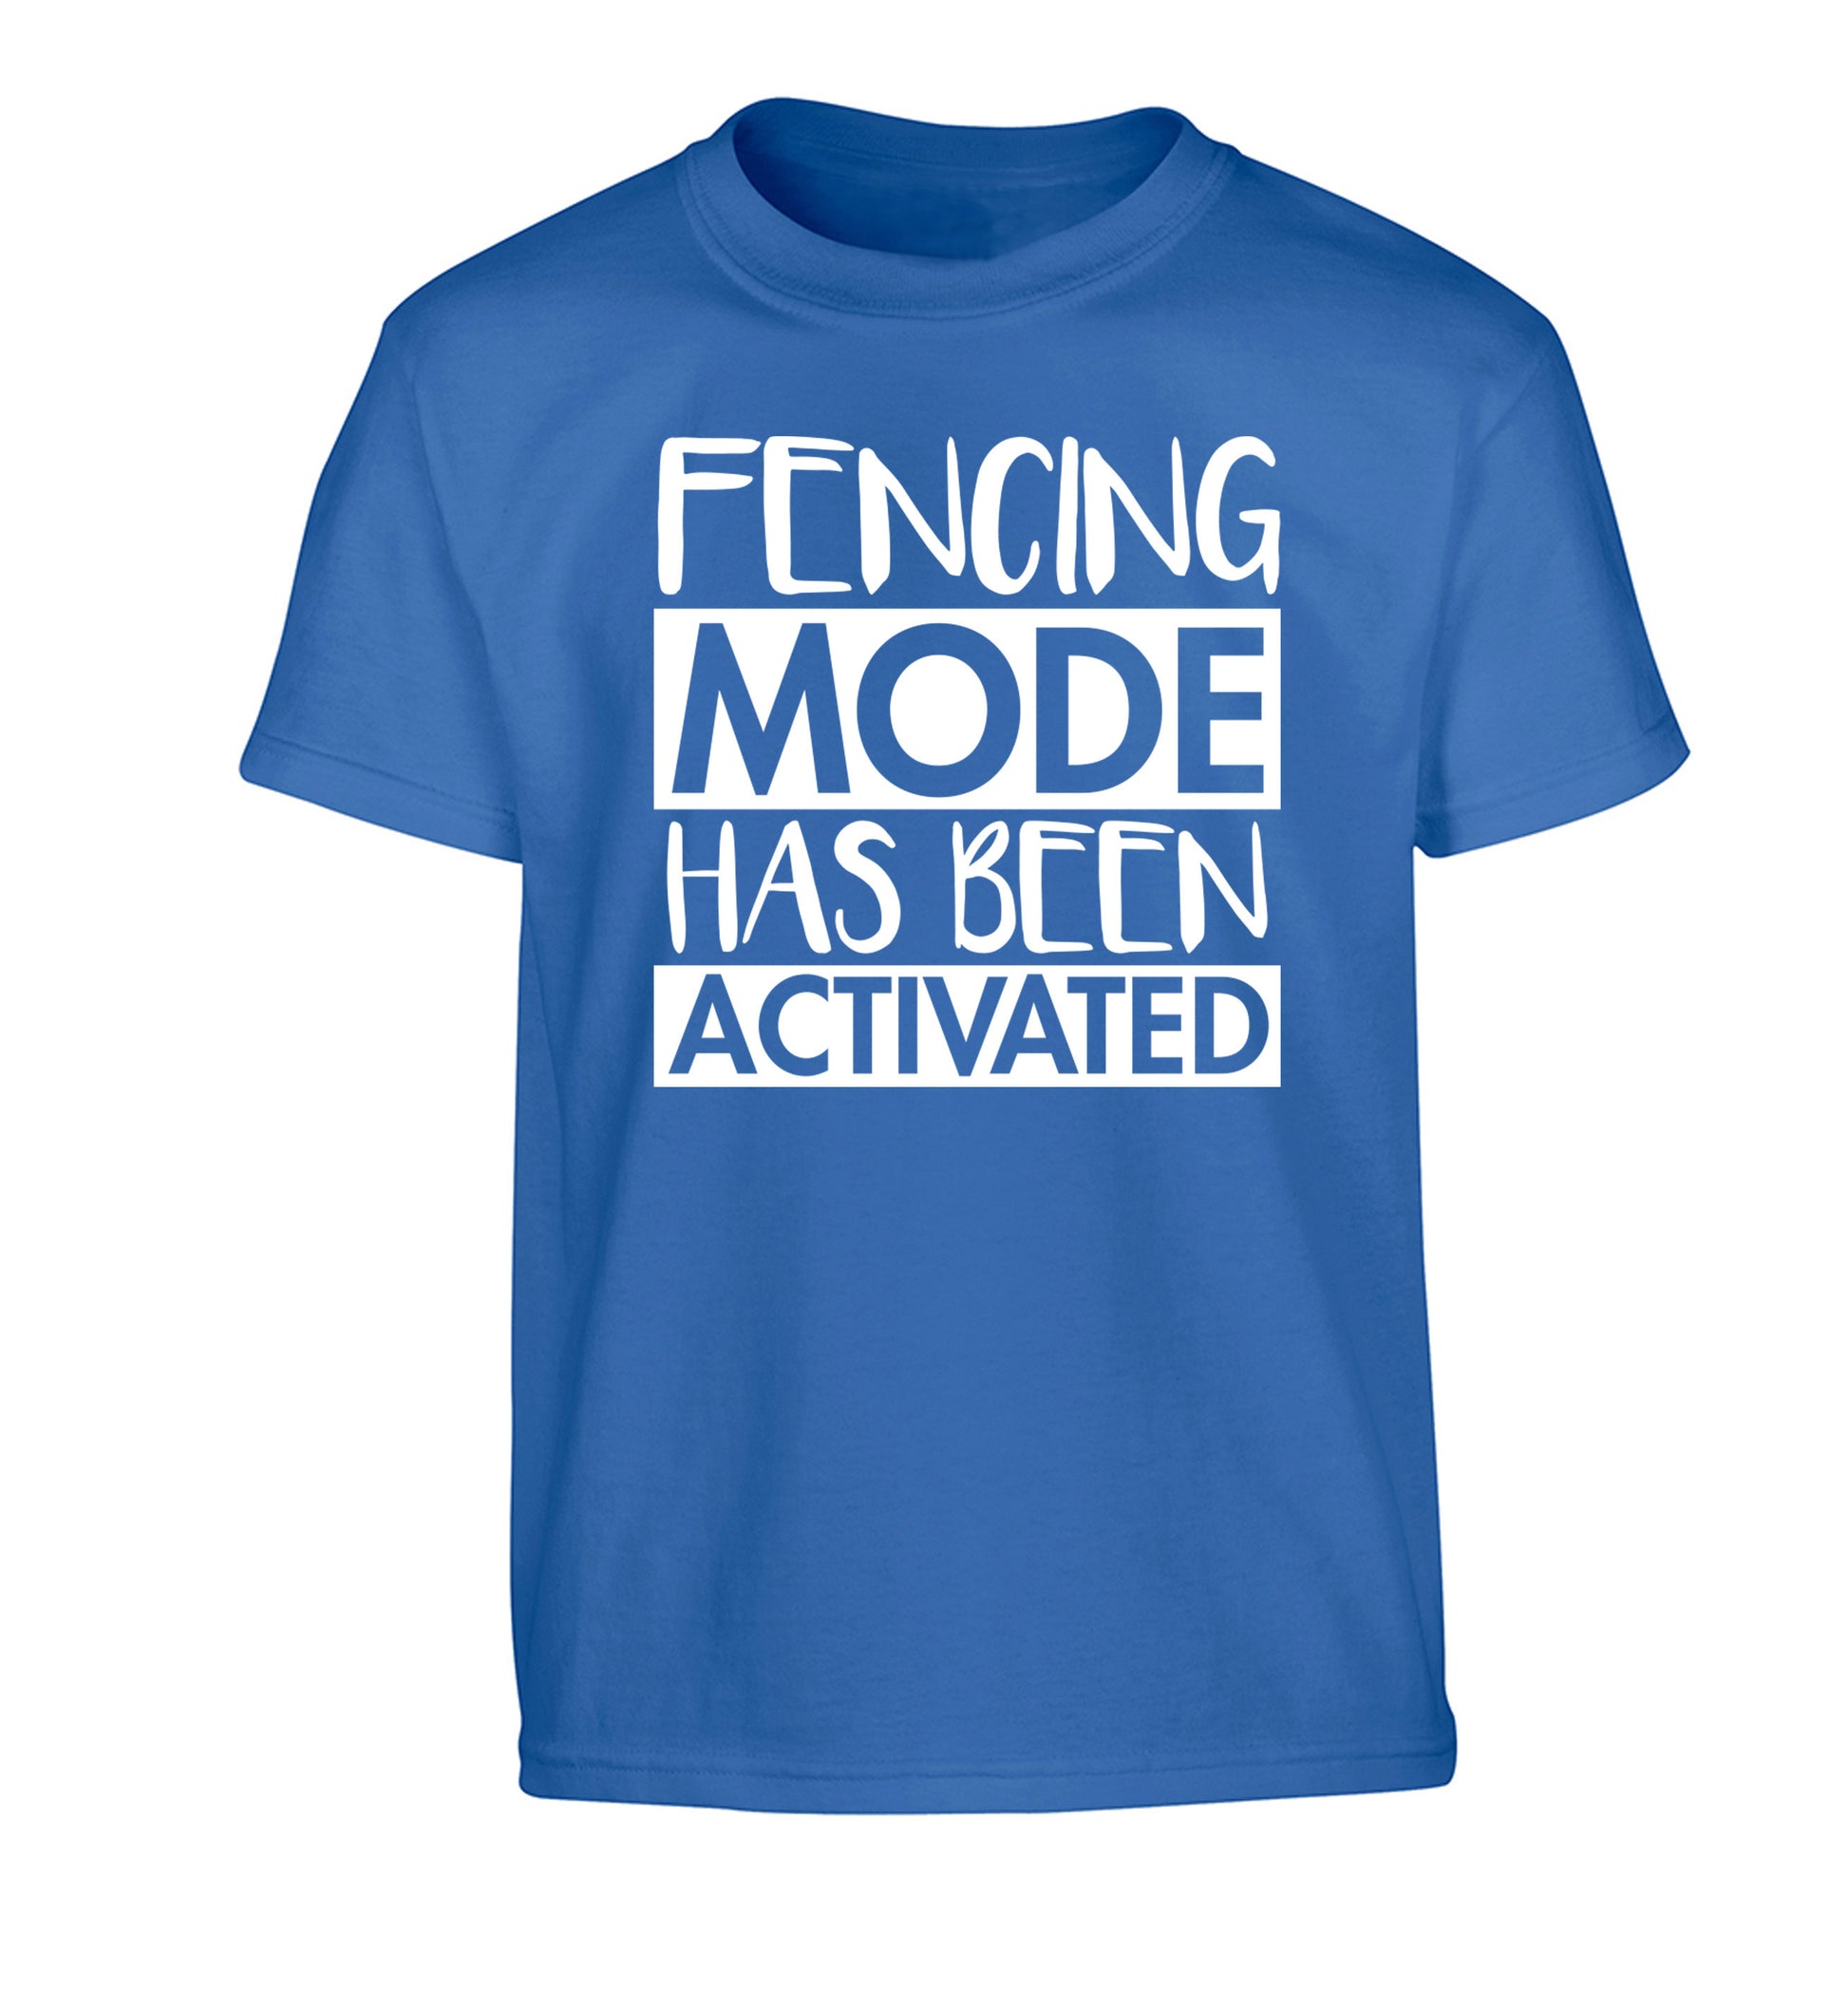 Fencing mode activated Children's blue Tshirt 12-14 Years